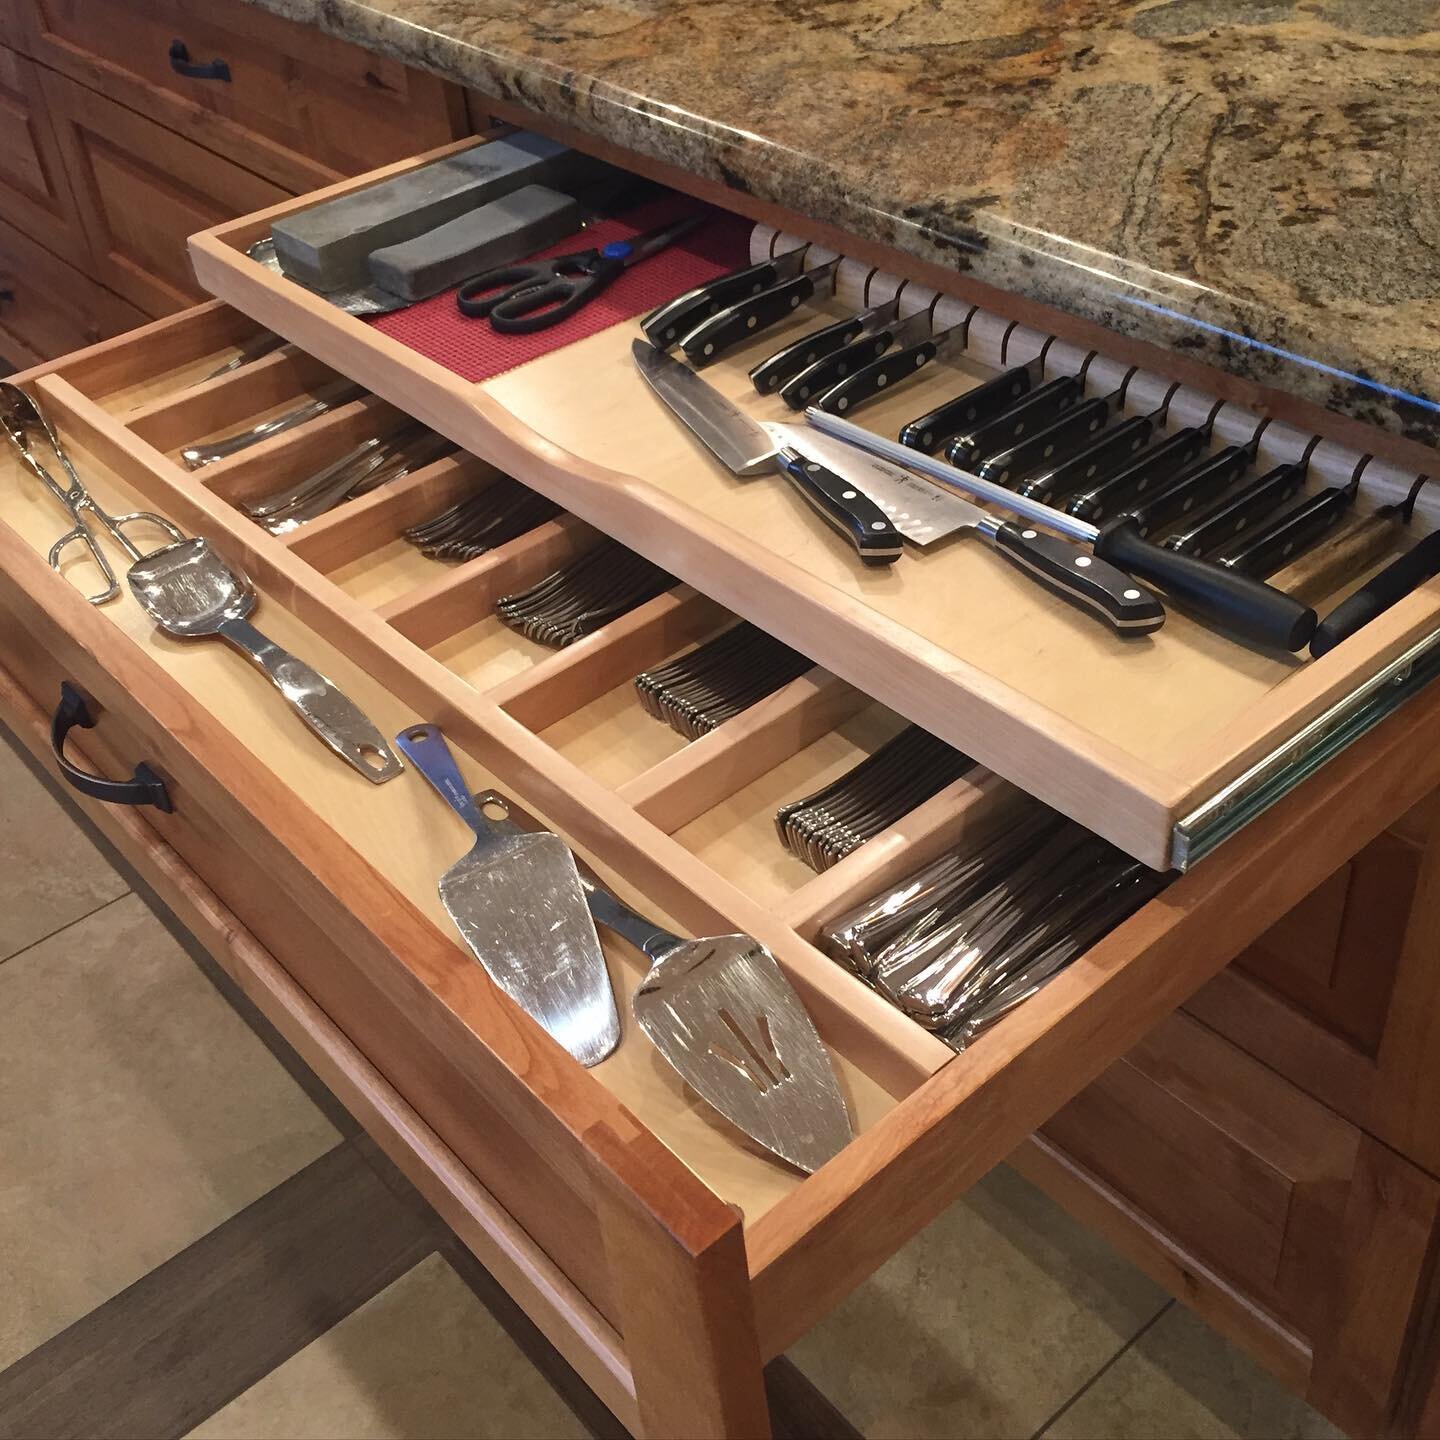 Customize your cabinetry to suit your needs. Two tier silverware/knife drawer. #cabinetstorage #denverkitchens #amishcabinets #acodenver #drawerorganization #drawerorganizer